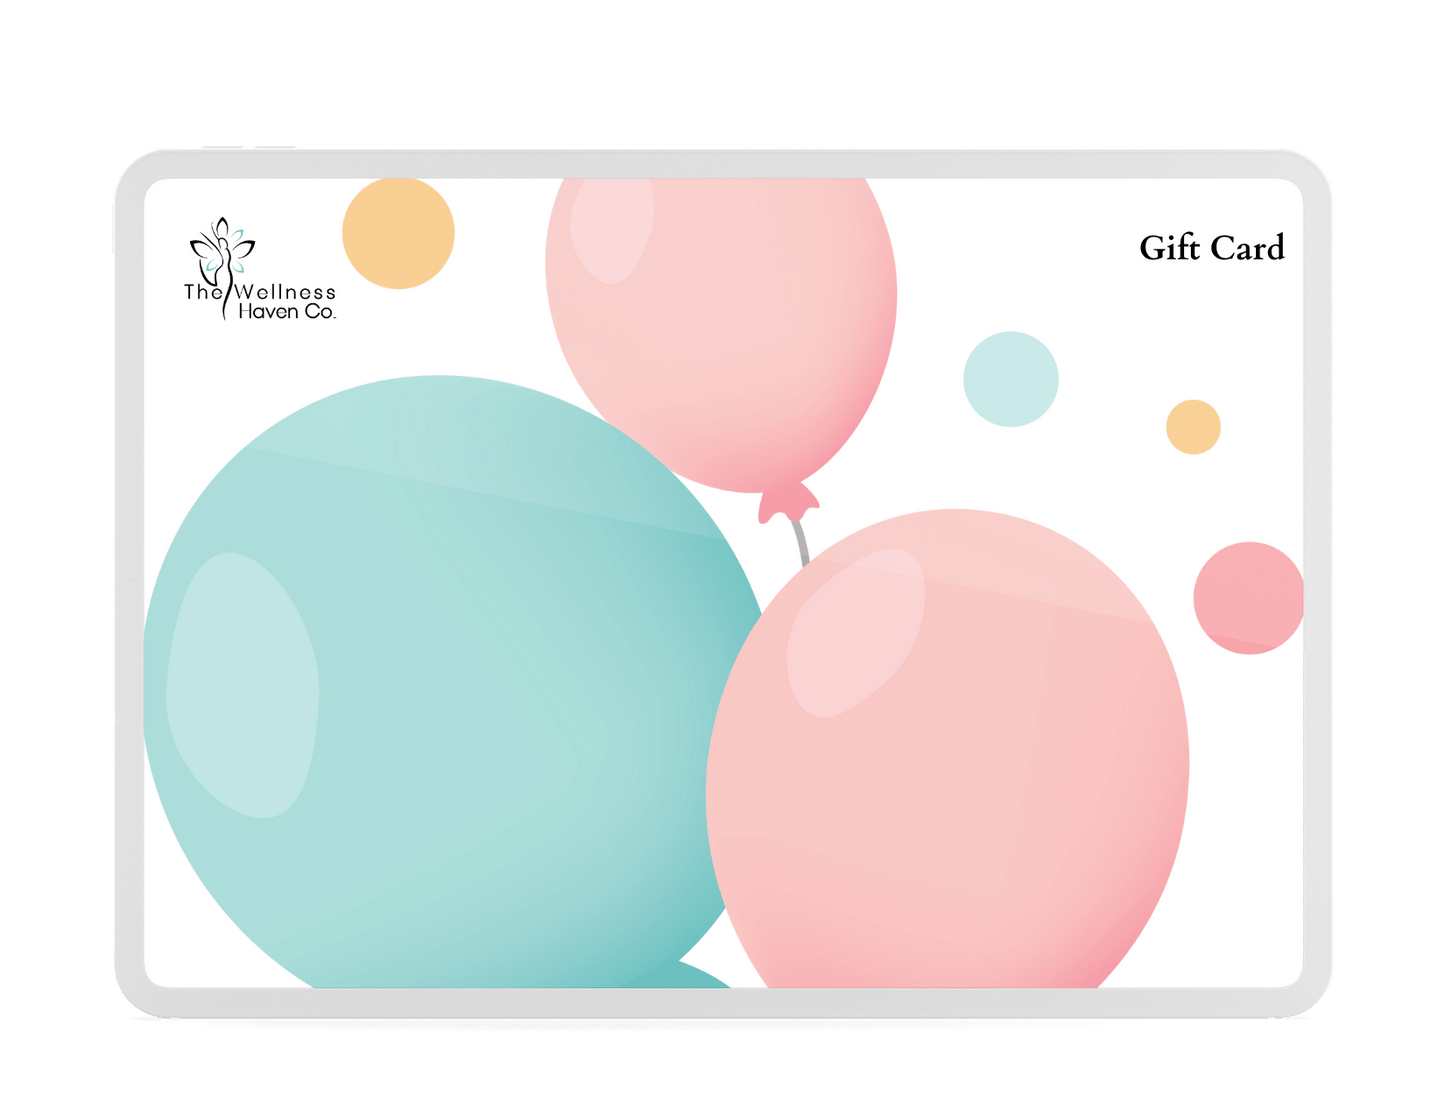 The Wellness Haven Co. Digital Gift Card